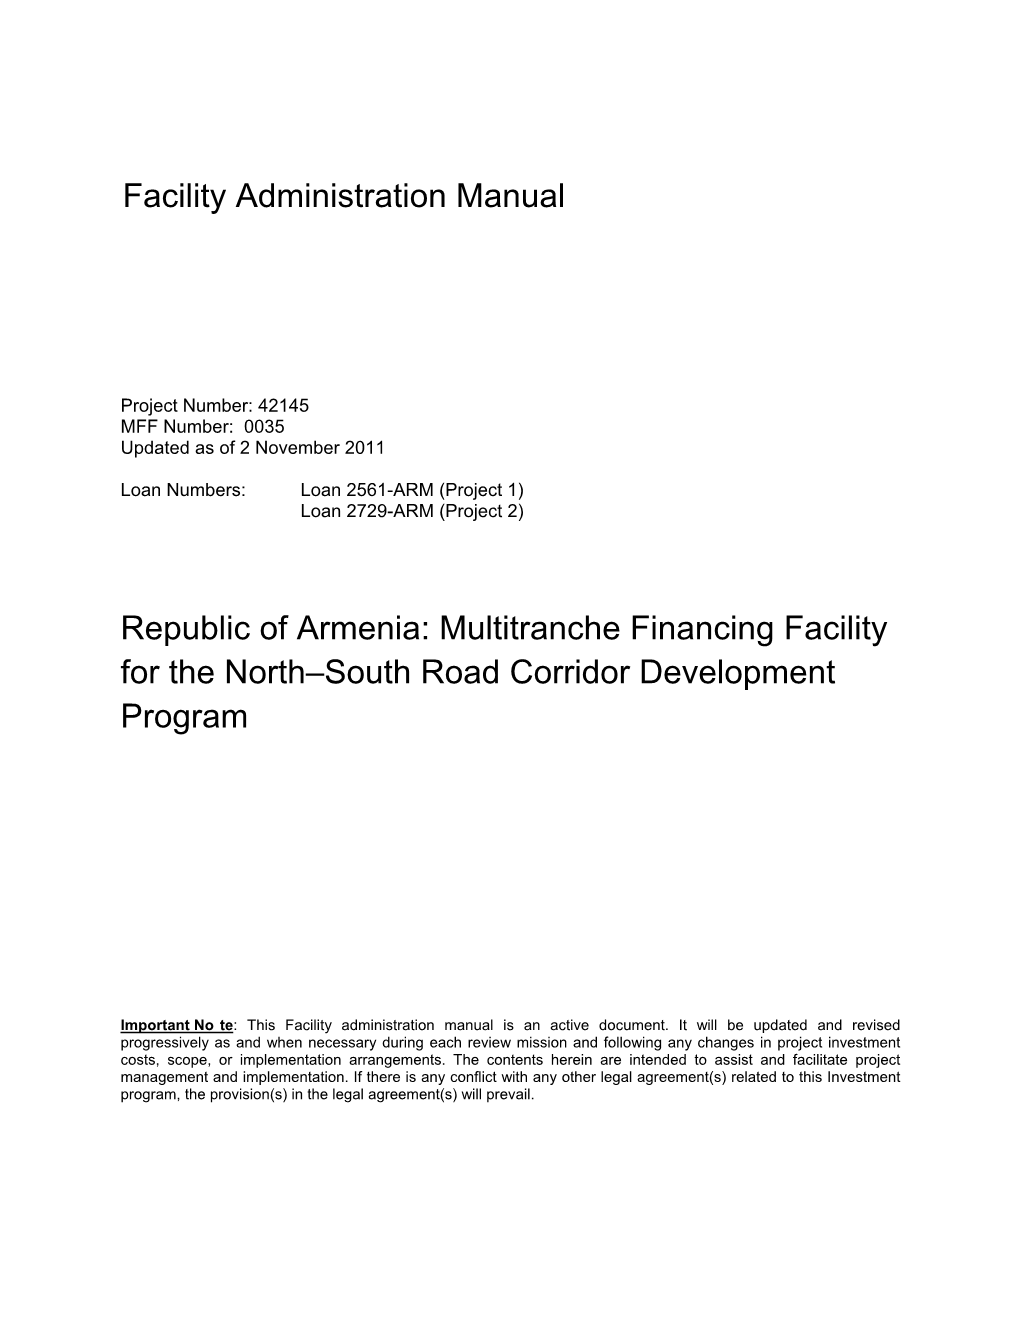 Updated Facility Administration Manual